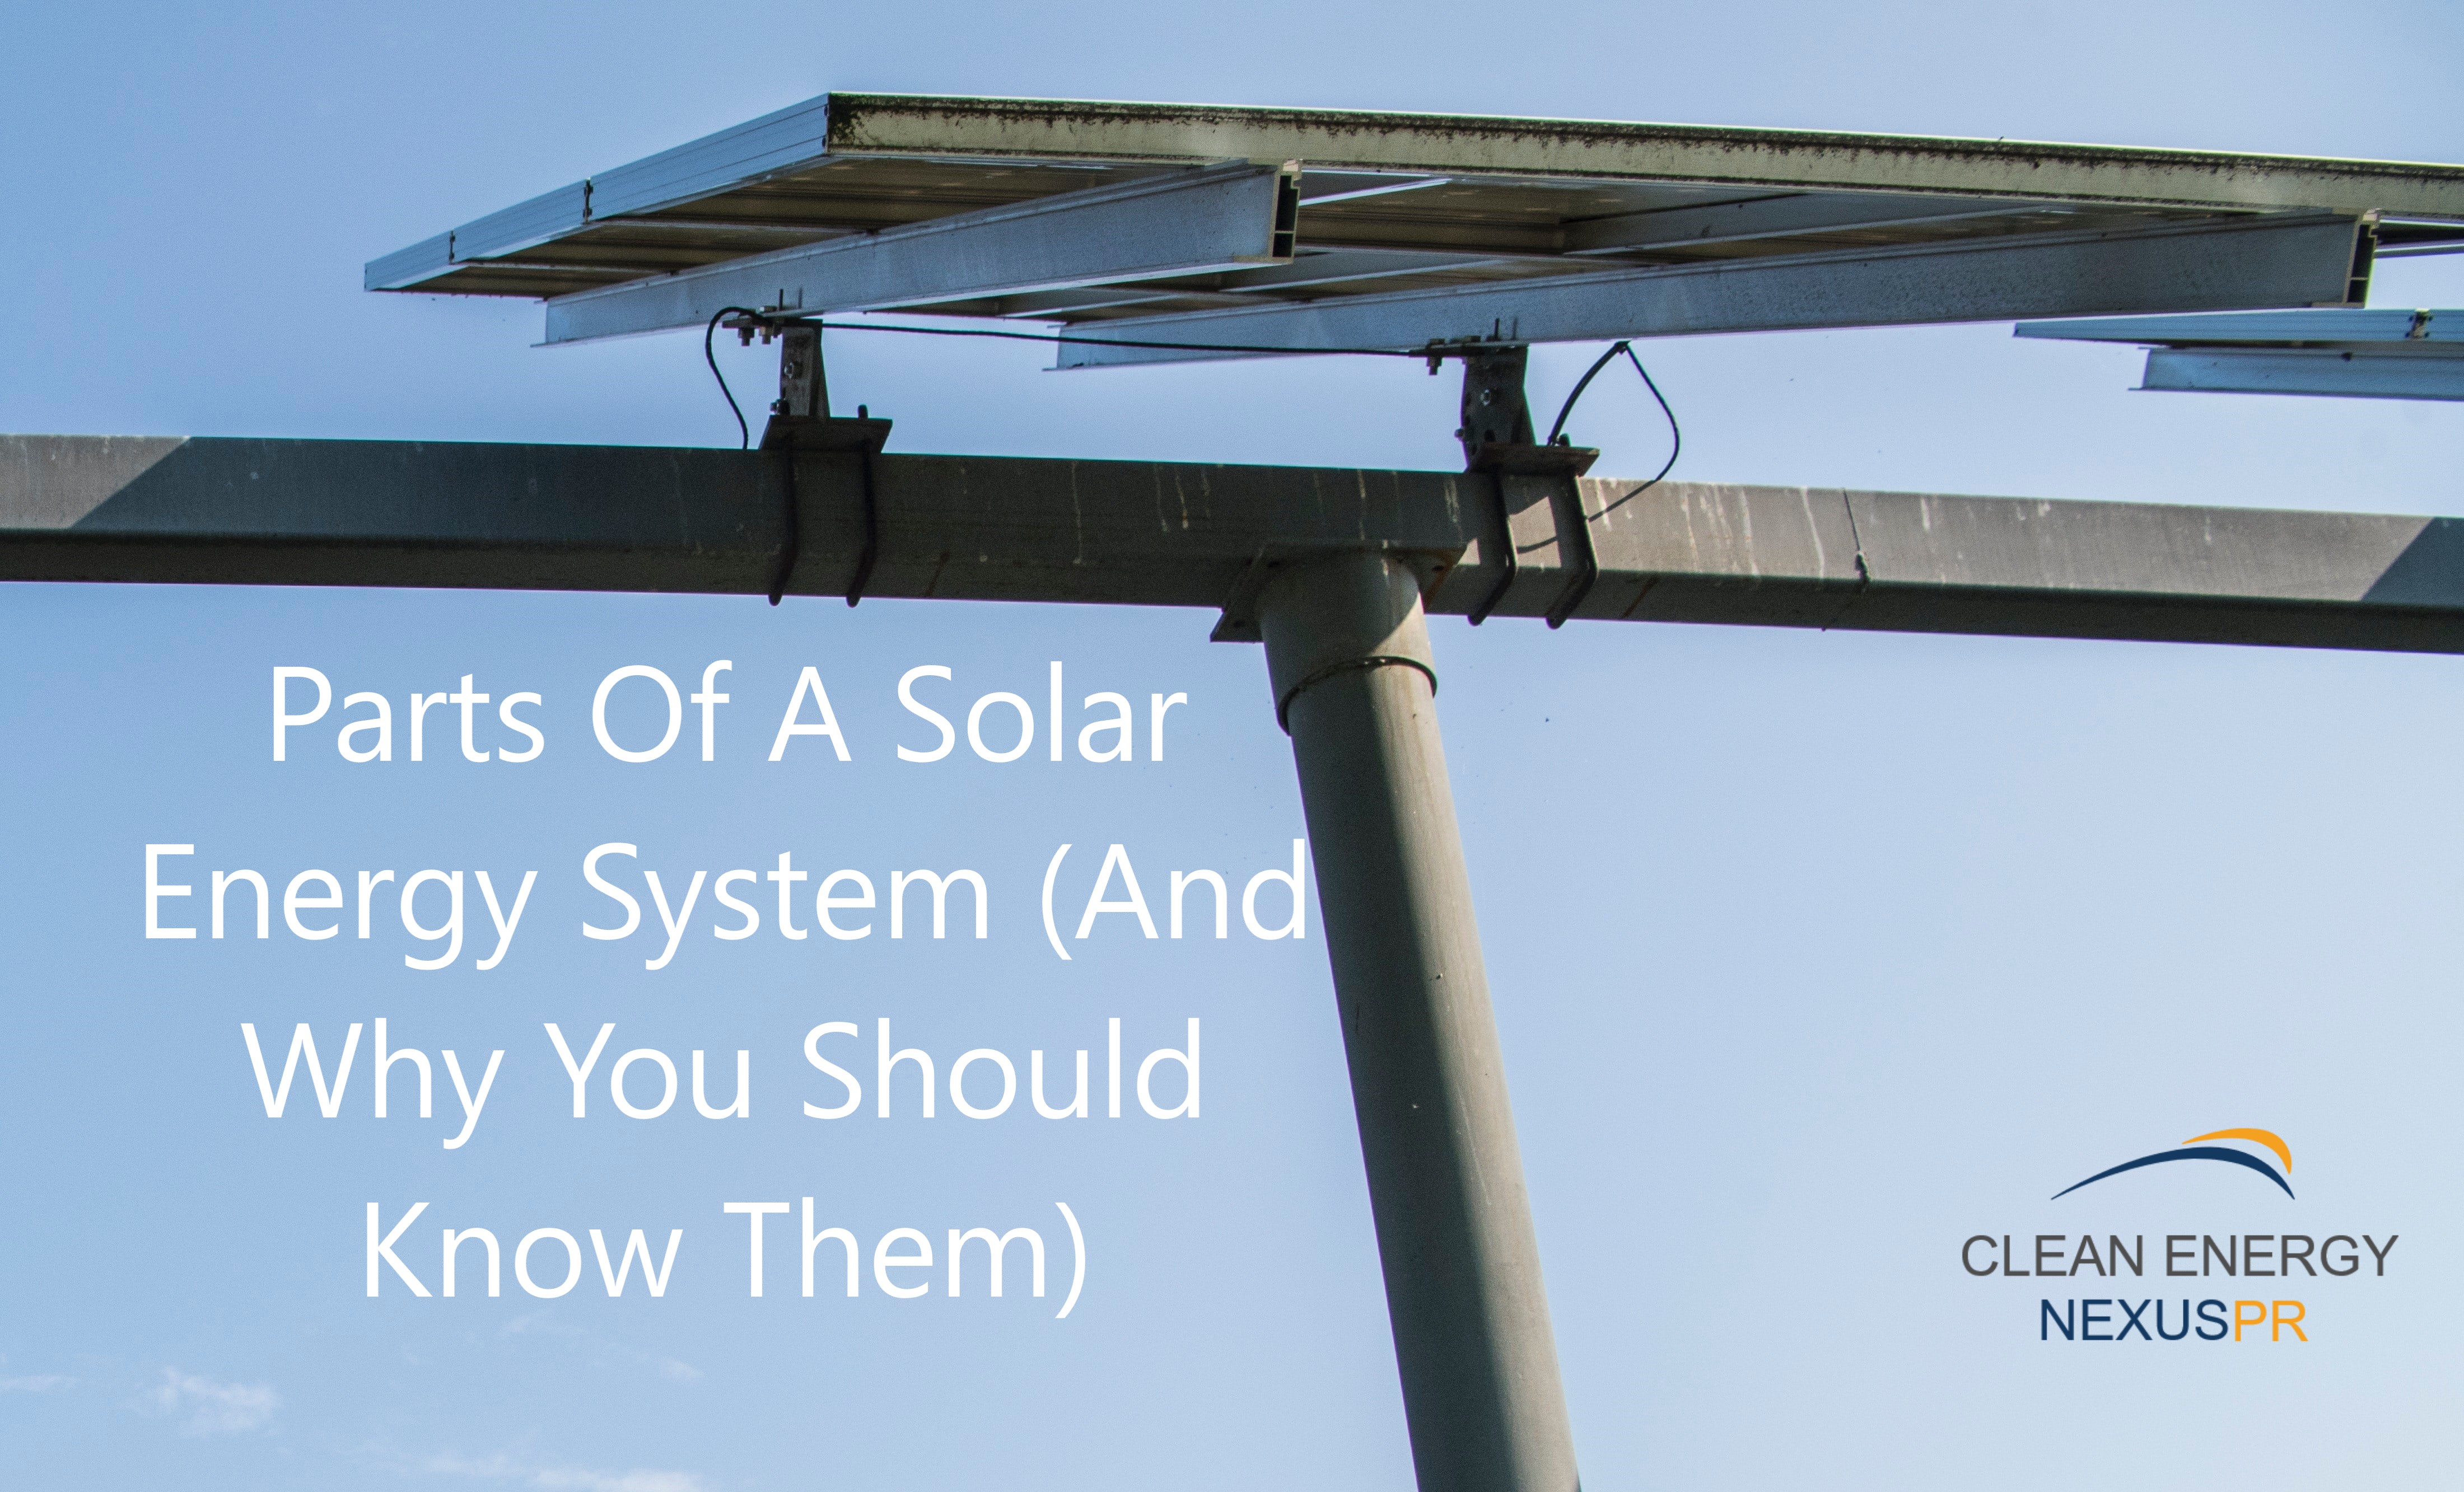 Parts of a Solar Energy System (And Why You Should Know Them)